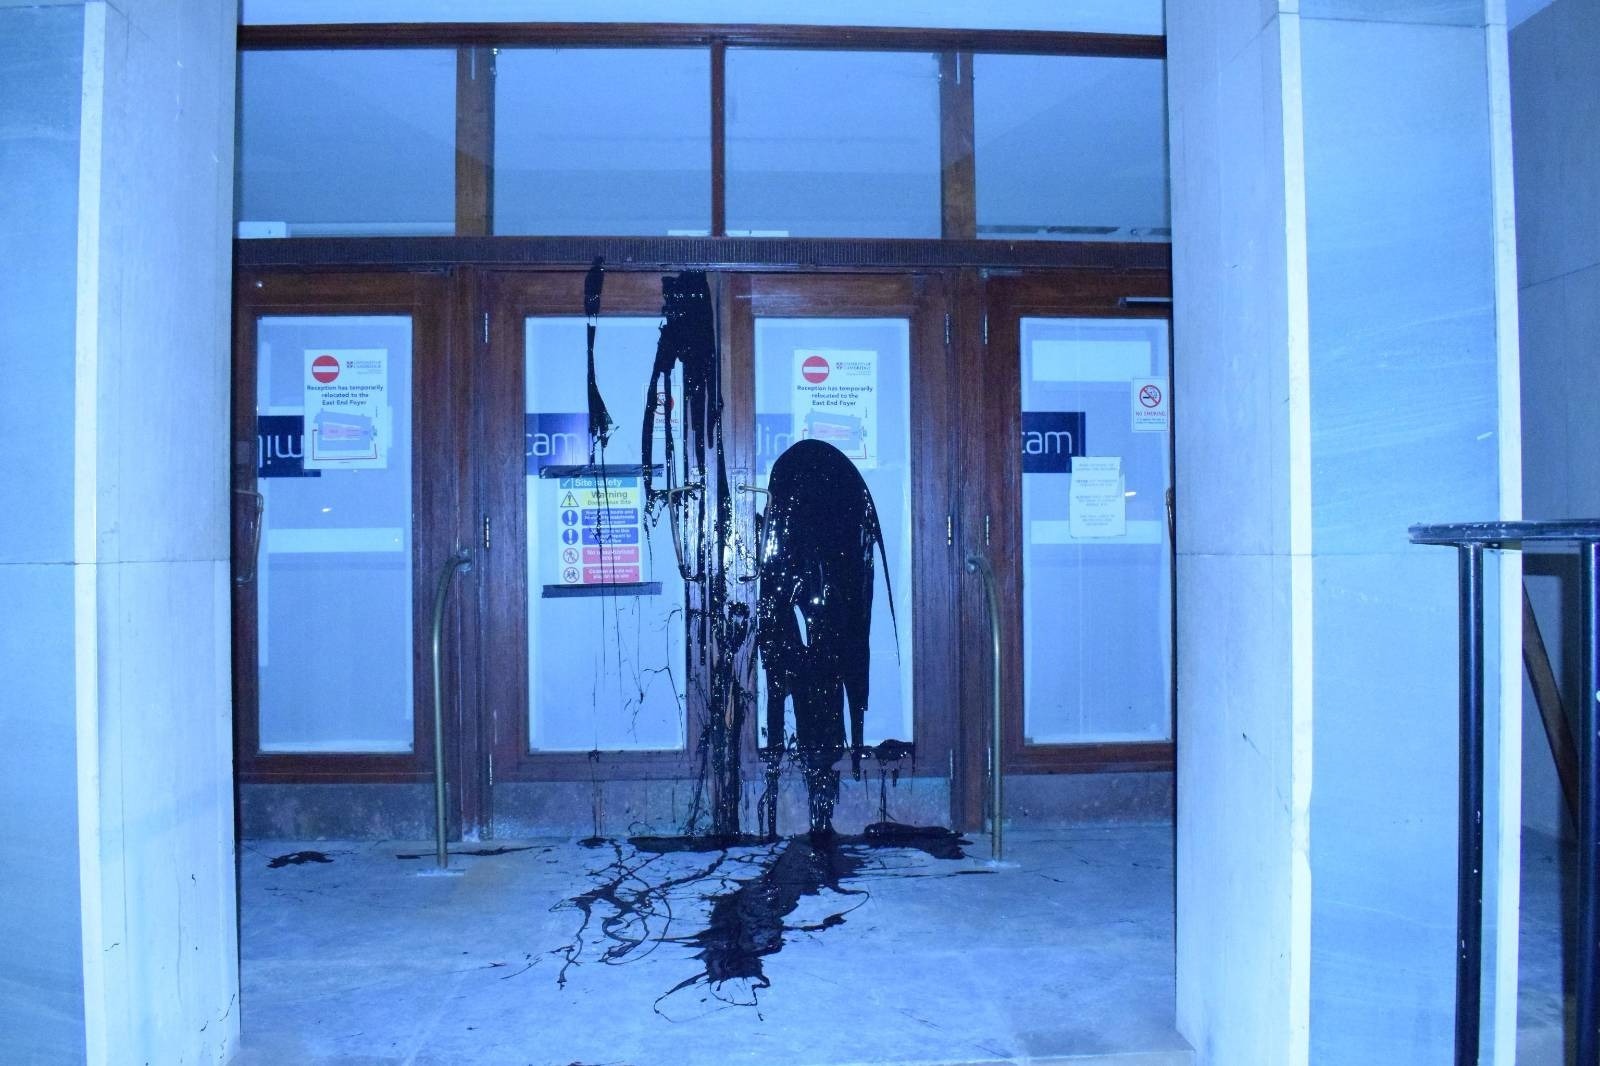 Black paint was thrown over the front doors of the University of Cambridge Chemistry Department by protestors.